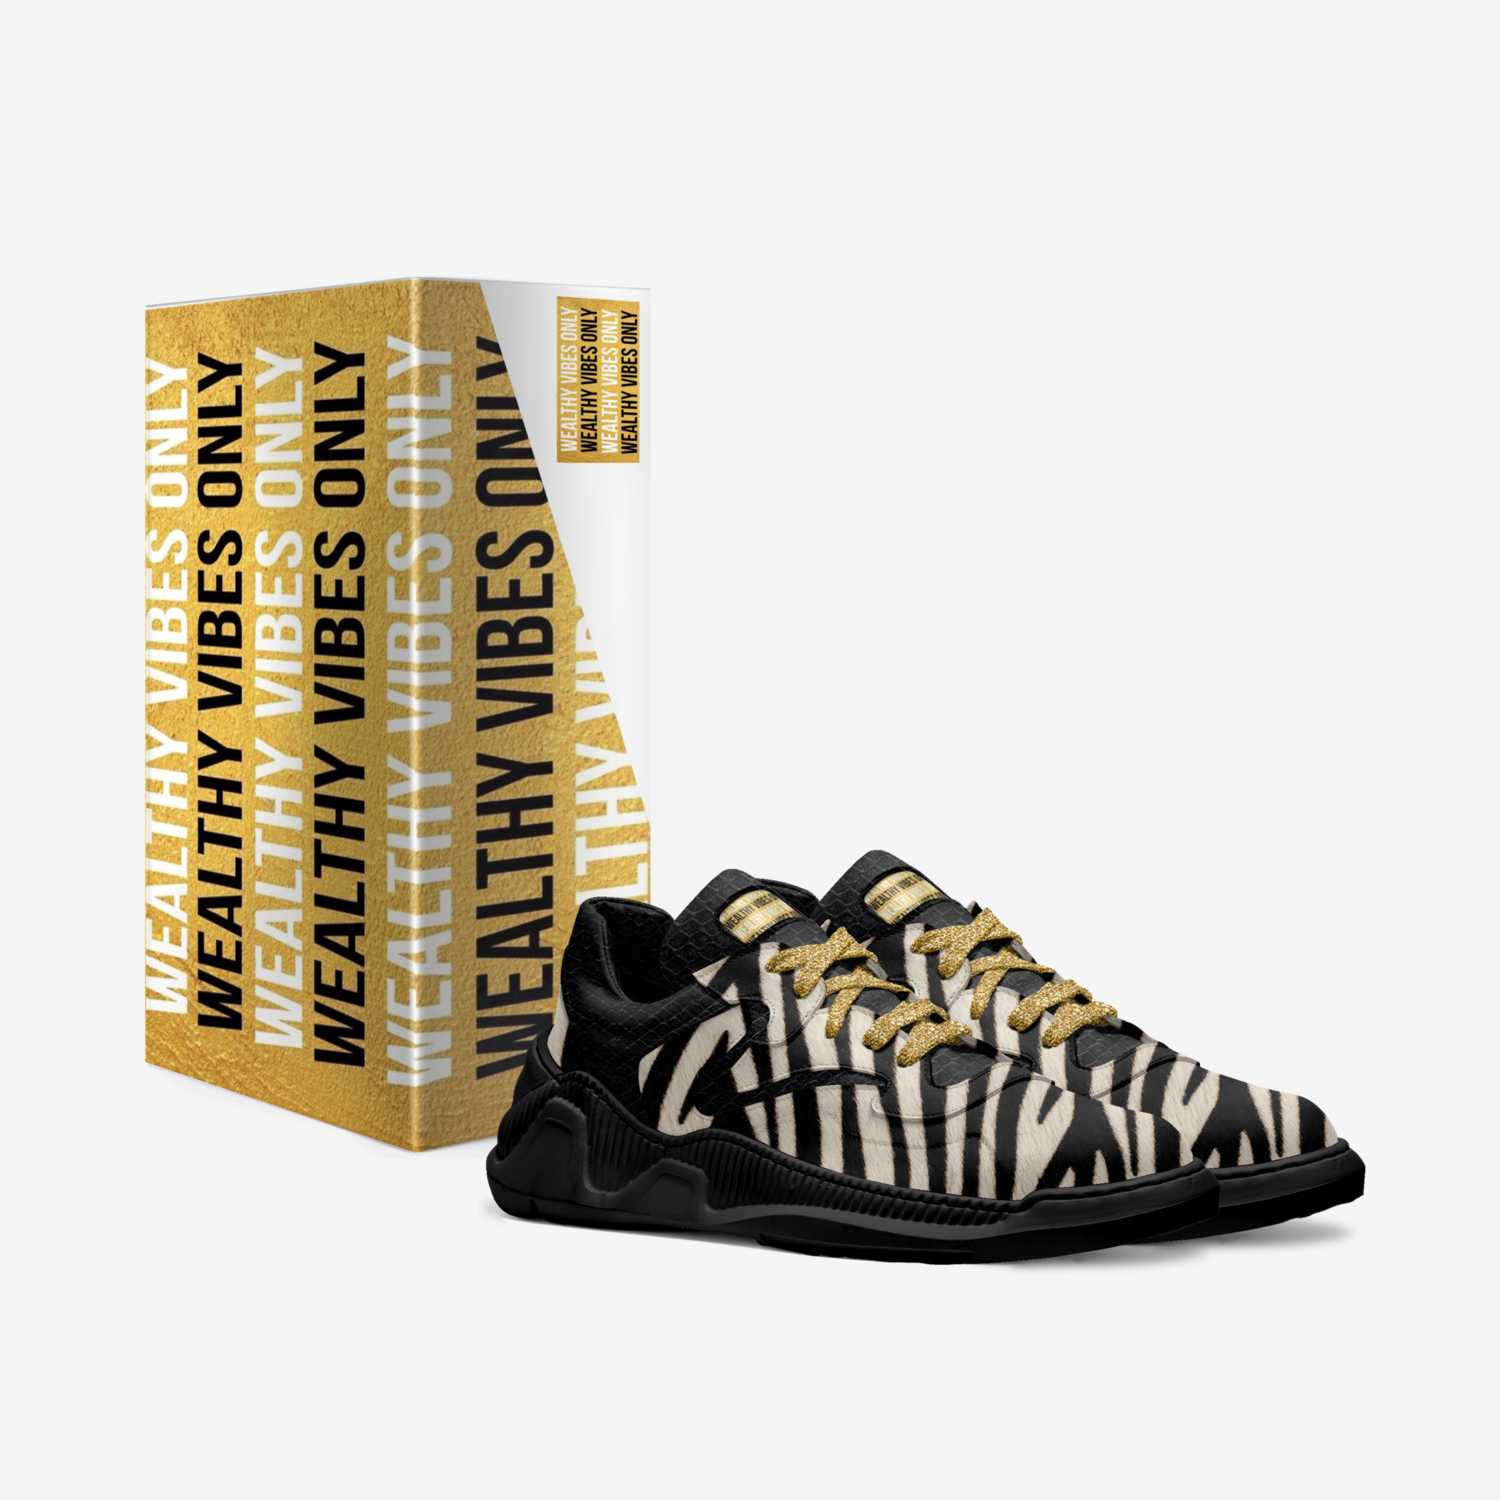 WEALTHY VIBESWORLD custom made in Italy shoes by Wealthy Vibes | Box view